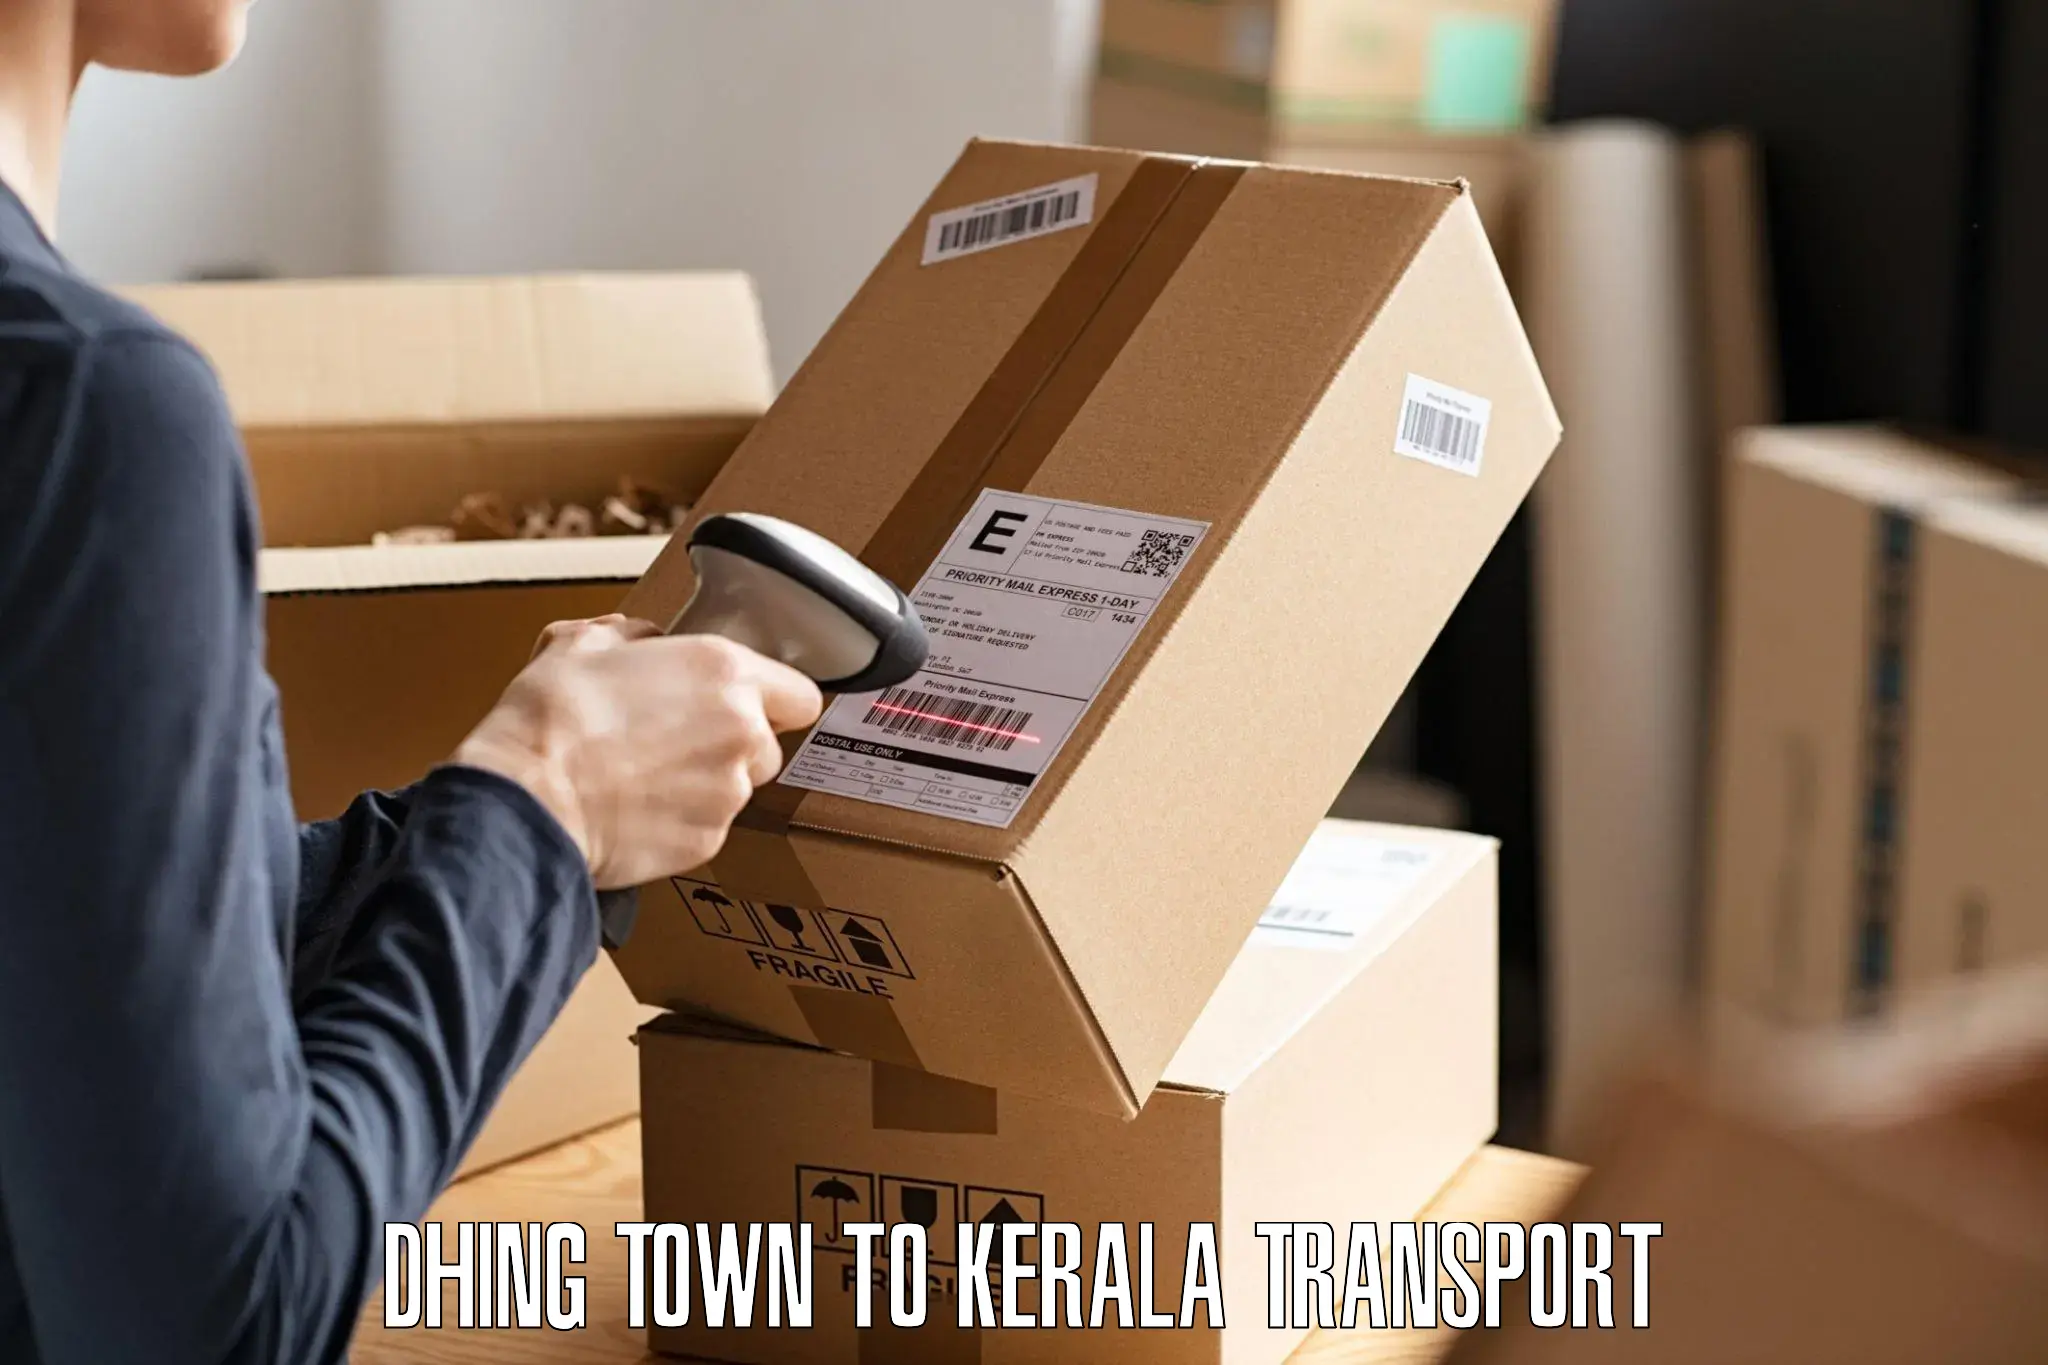 Domestic transport services Dhing Town to Kazhakkoottam